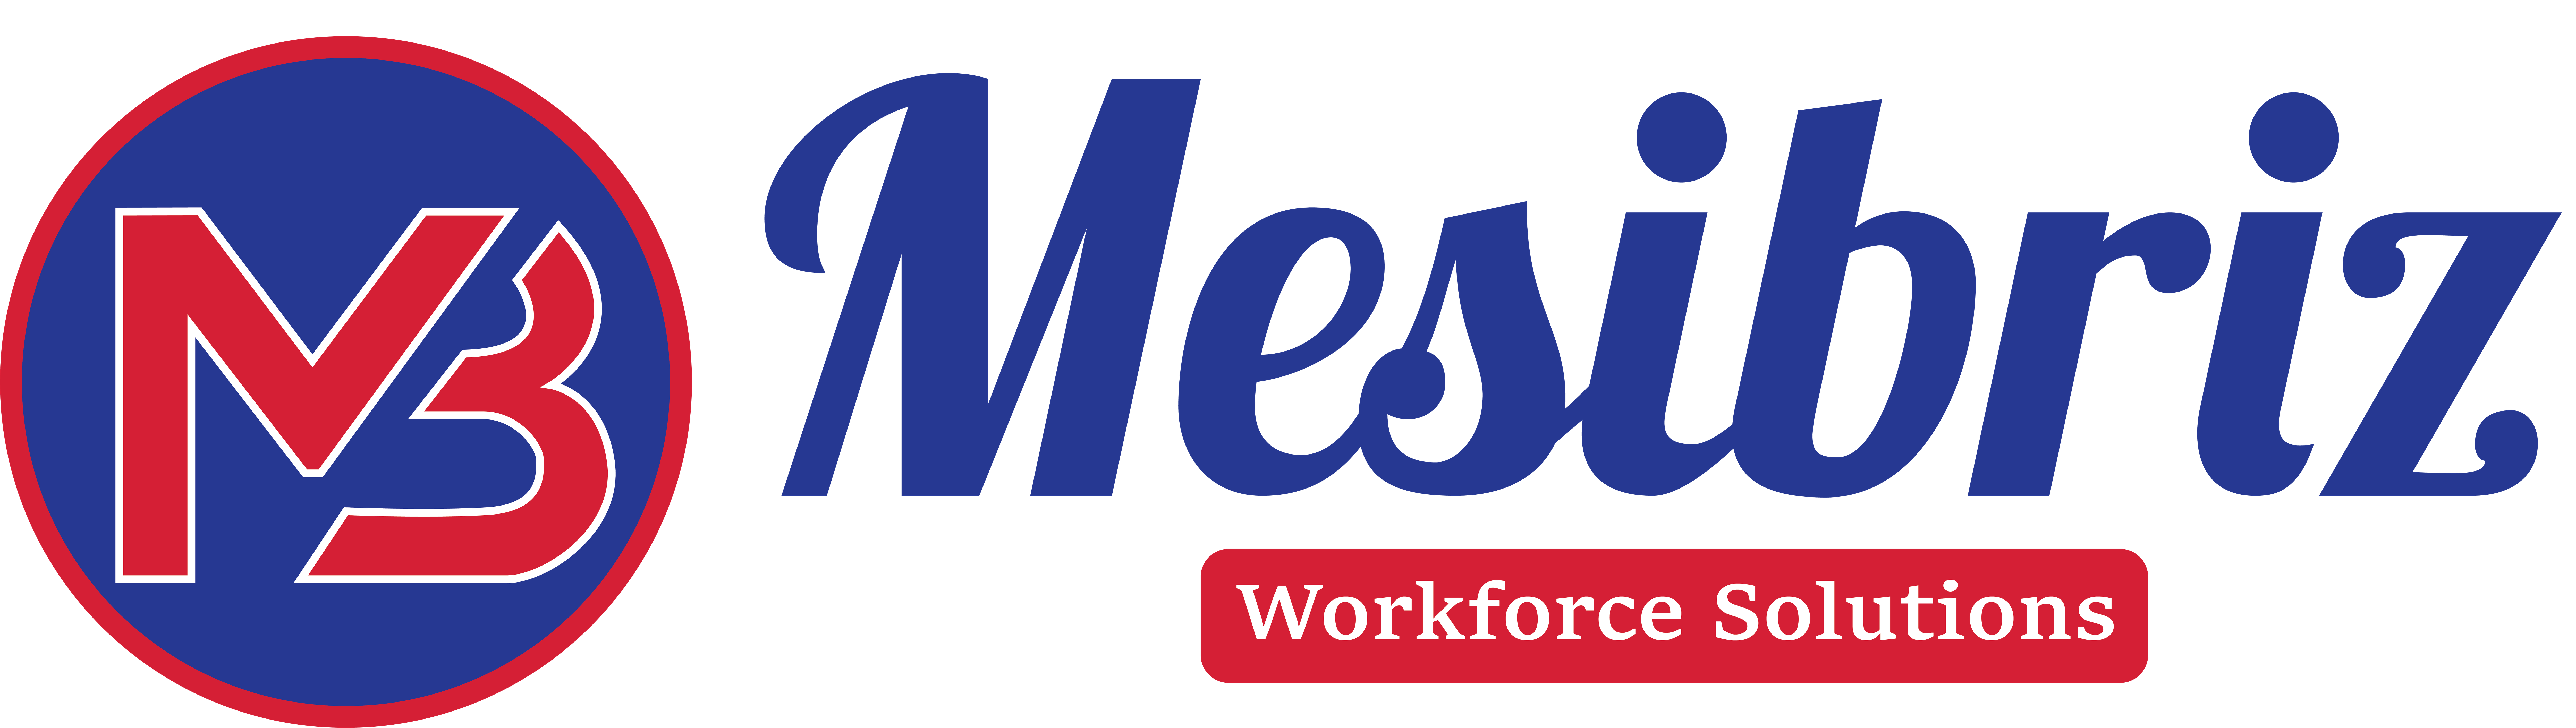 A blue and red logo for the mesita workforce center.